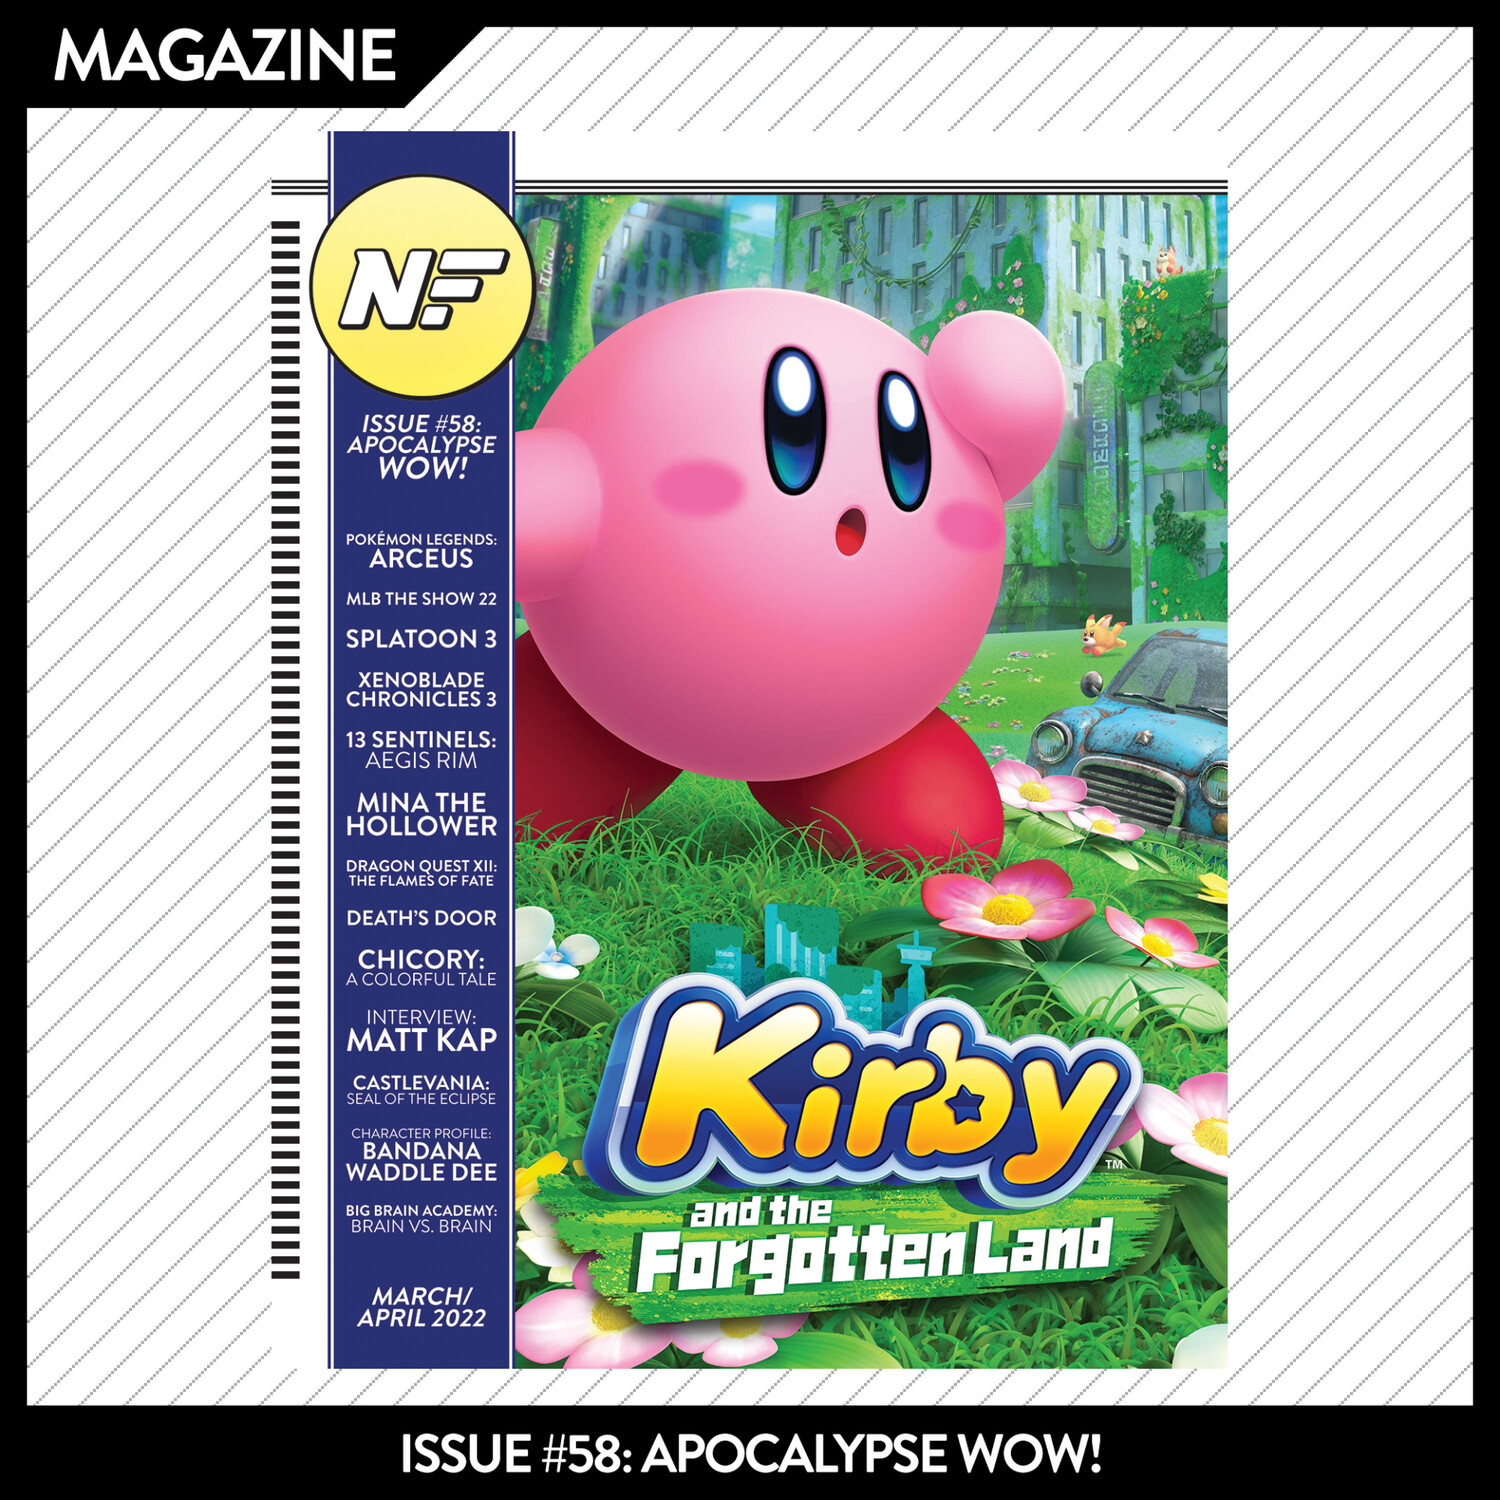 Issue #58: Apocalypse Wow! – March/April 2022